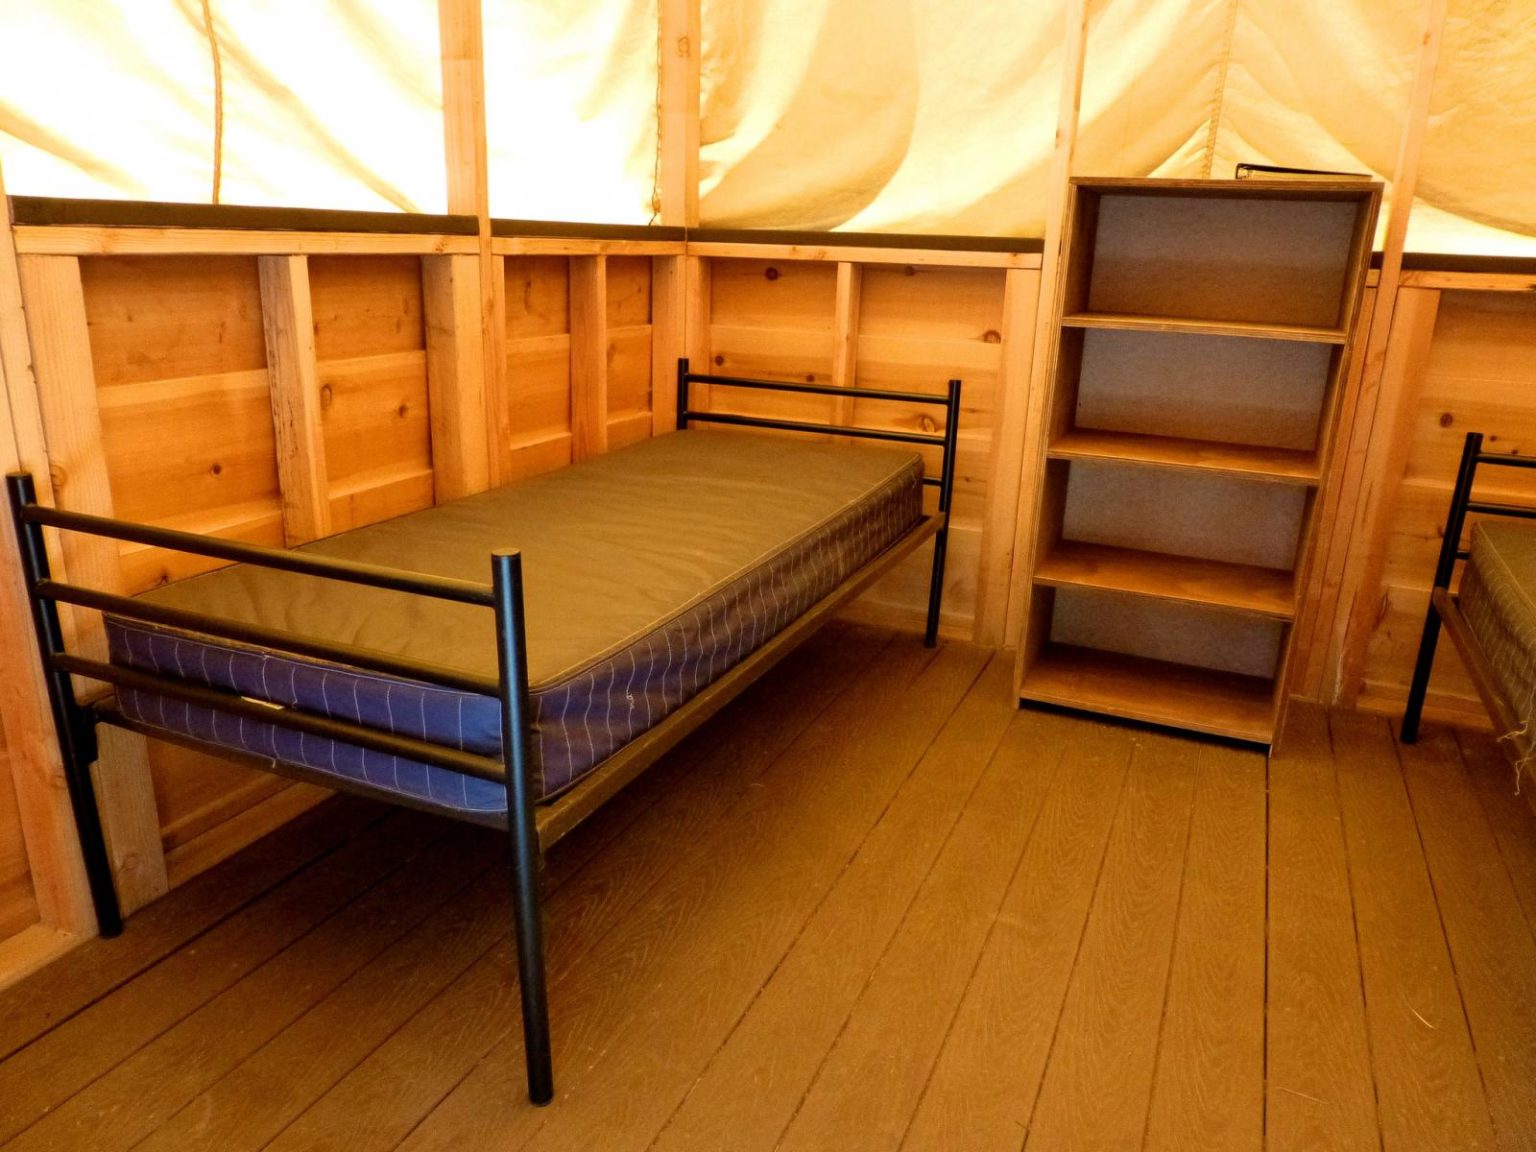 two twin beds with a wooden bookshelf